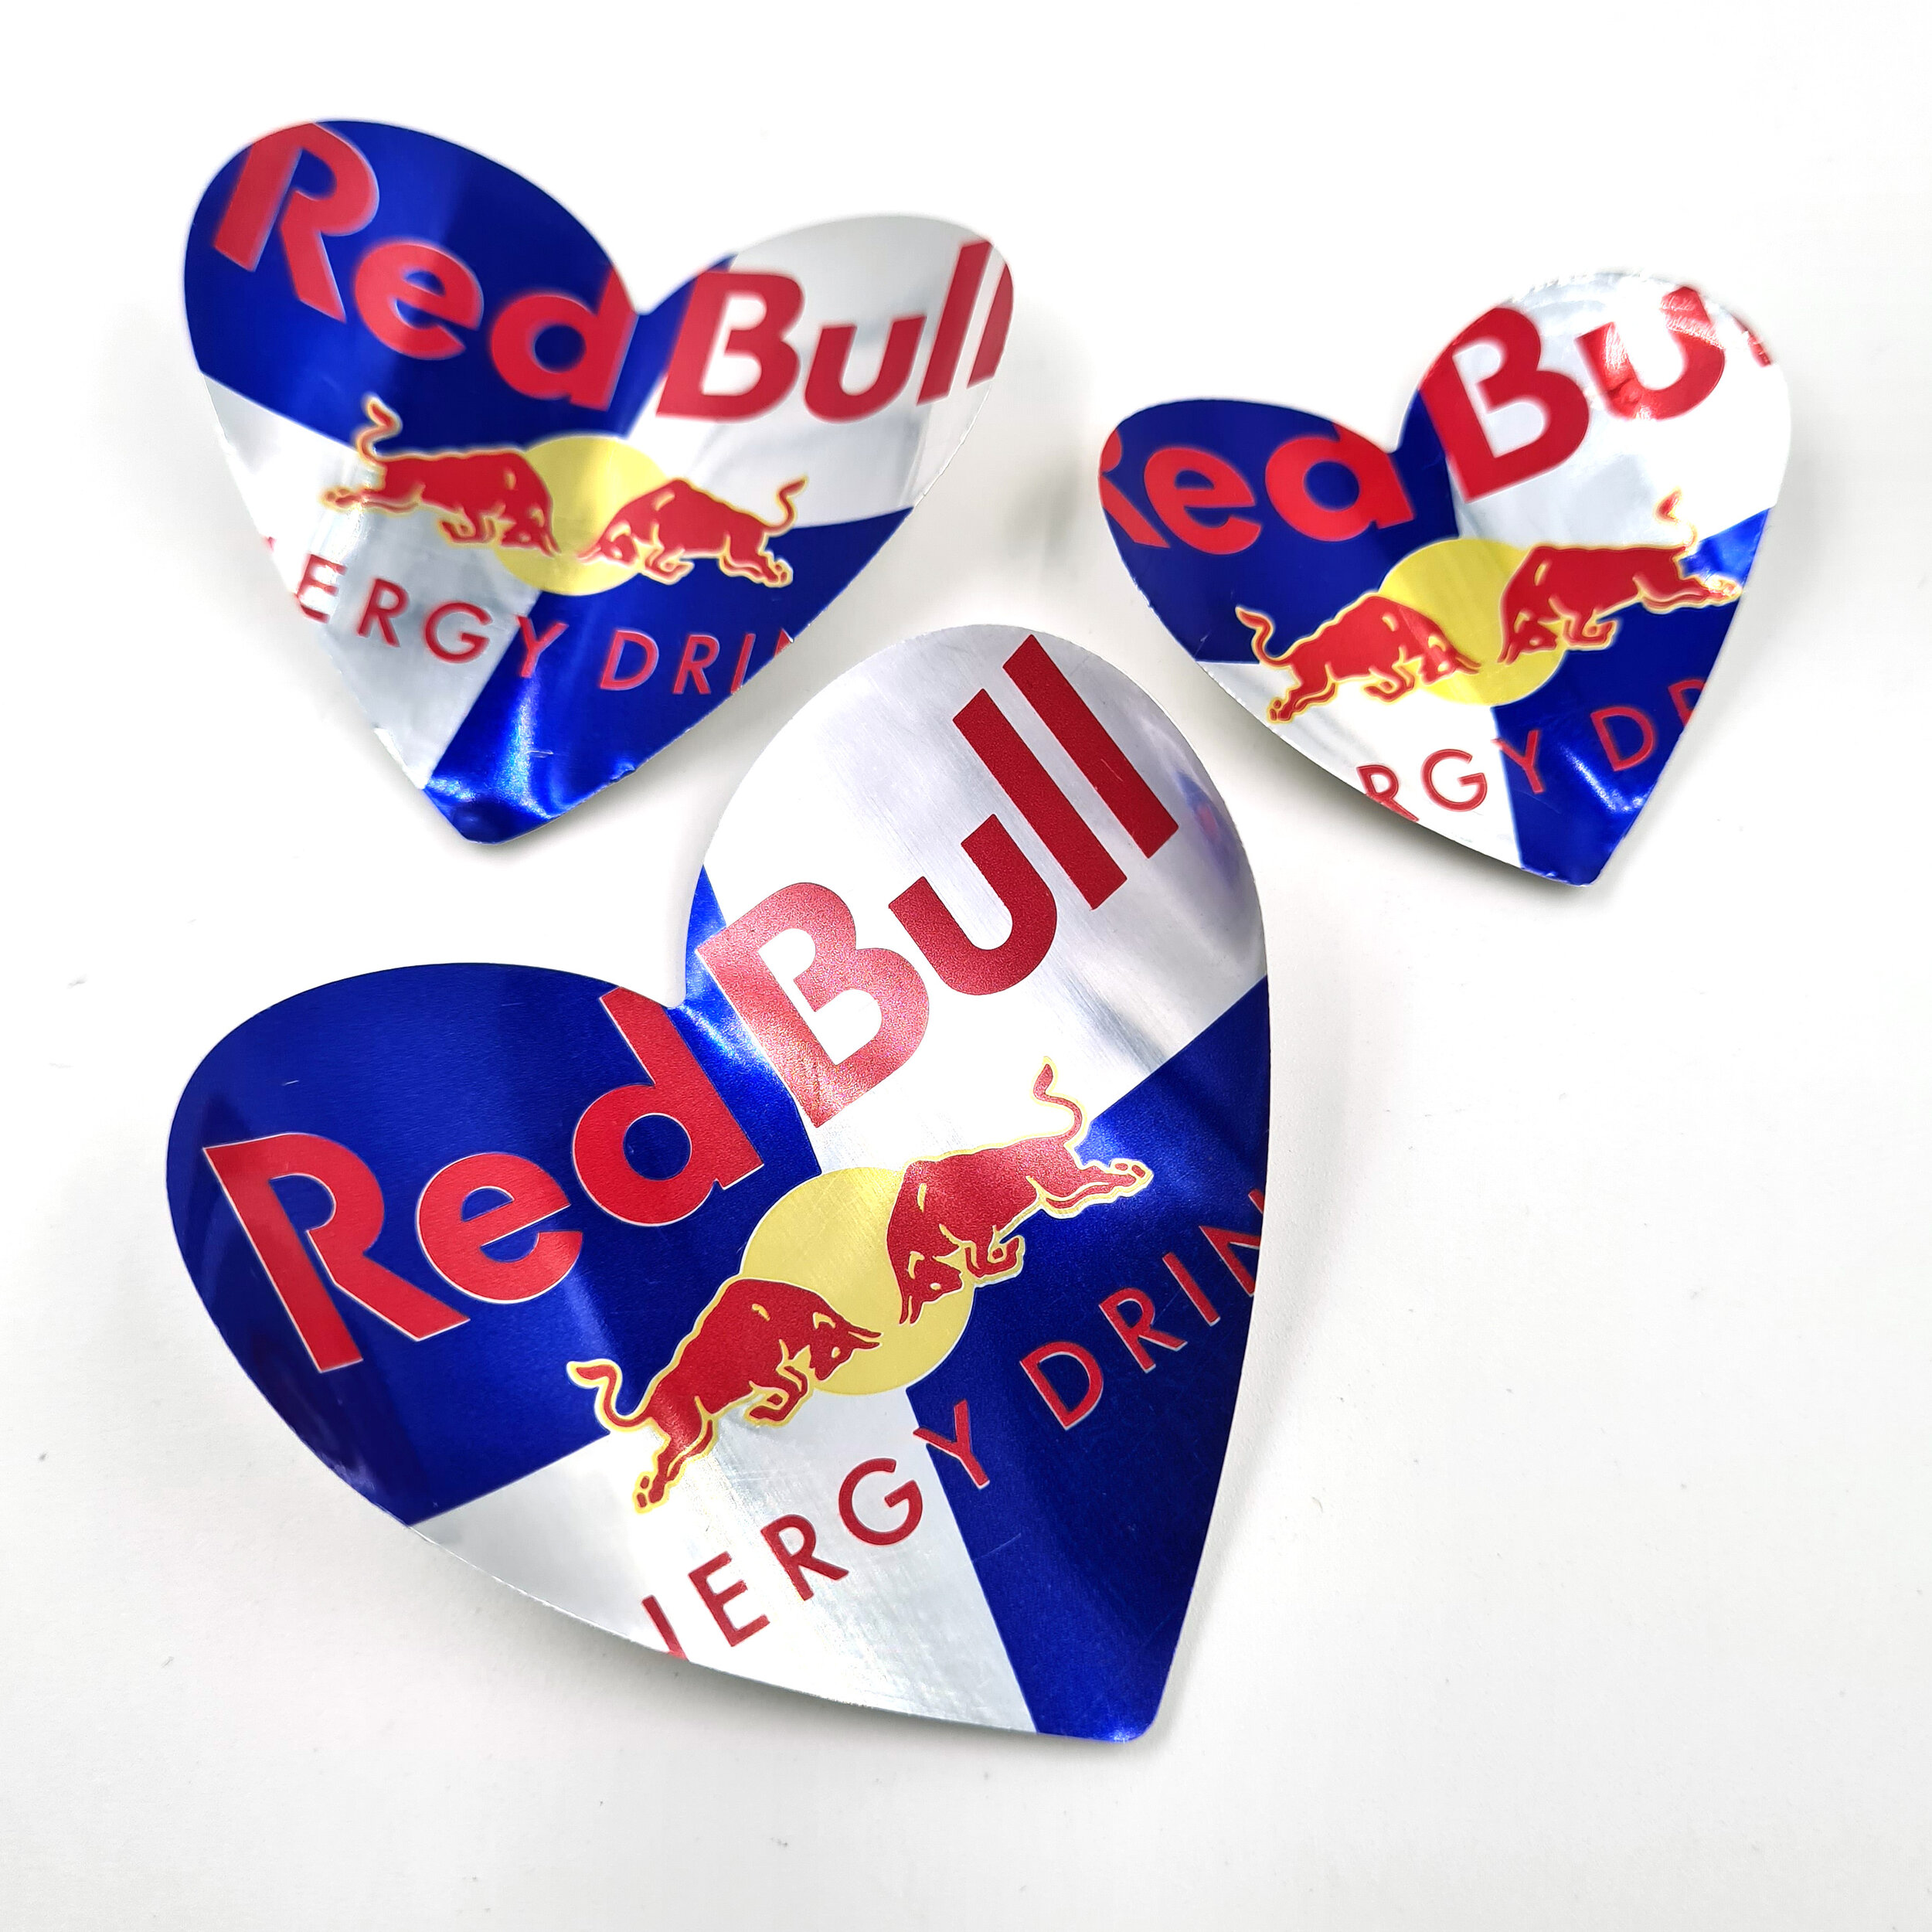 Three Redbull blue red and silver Heart Can Magnets 